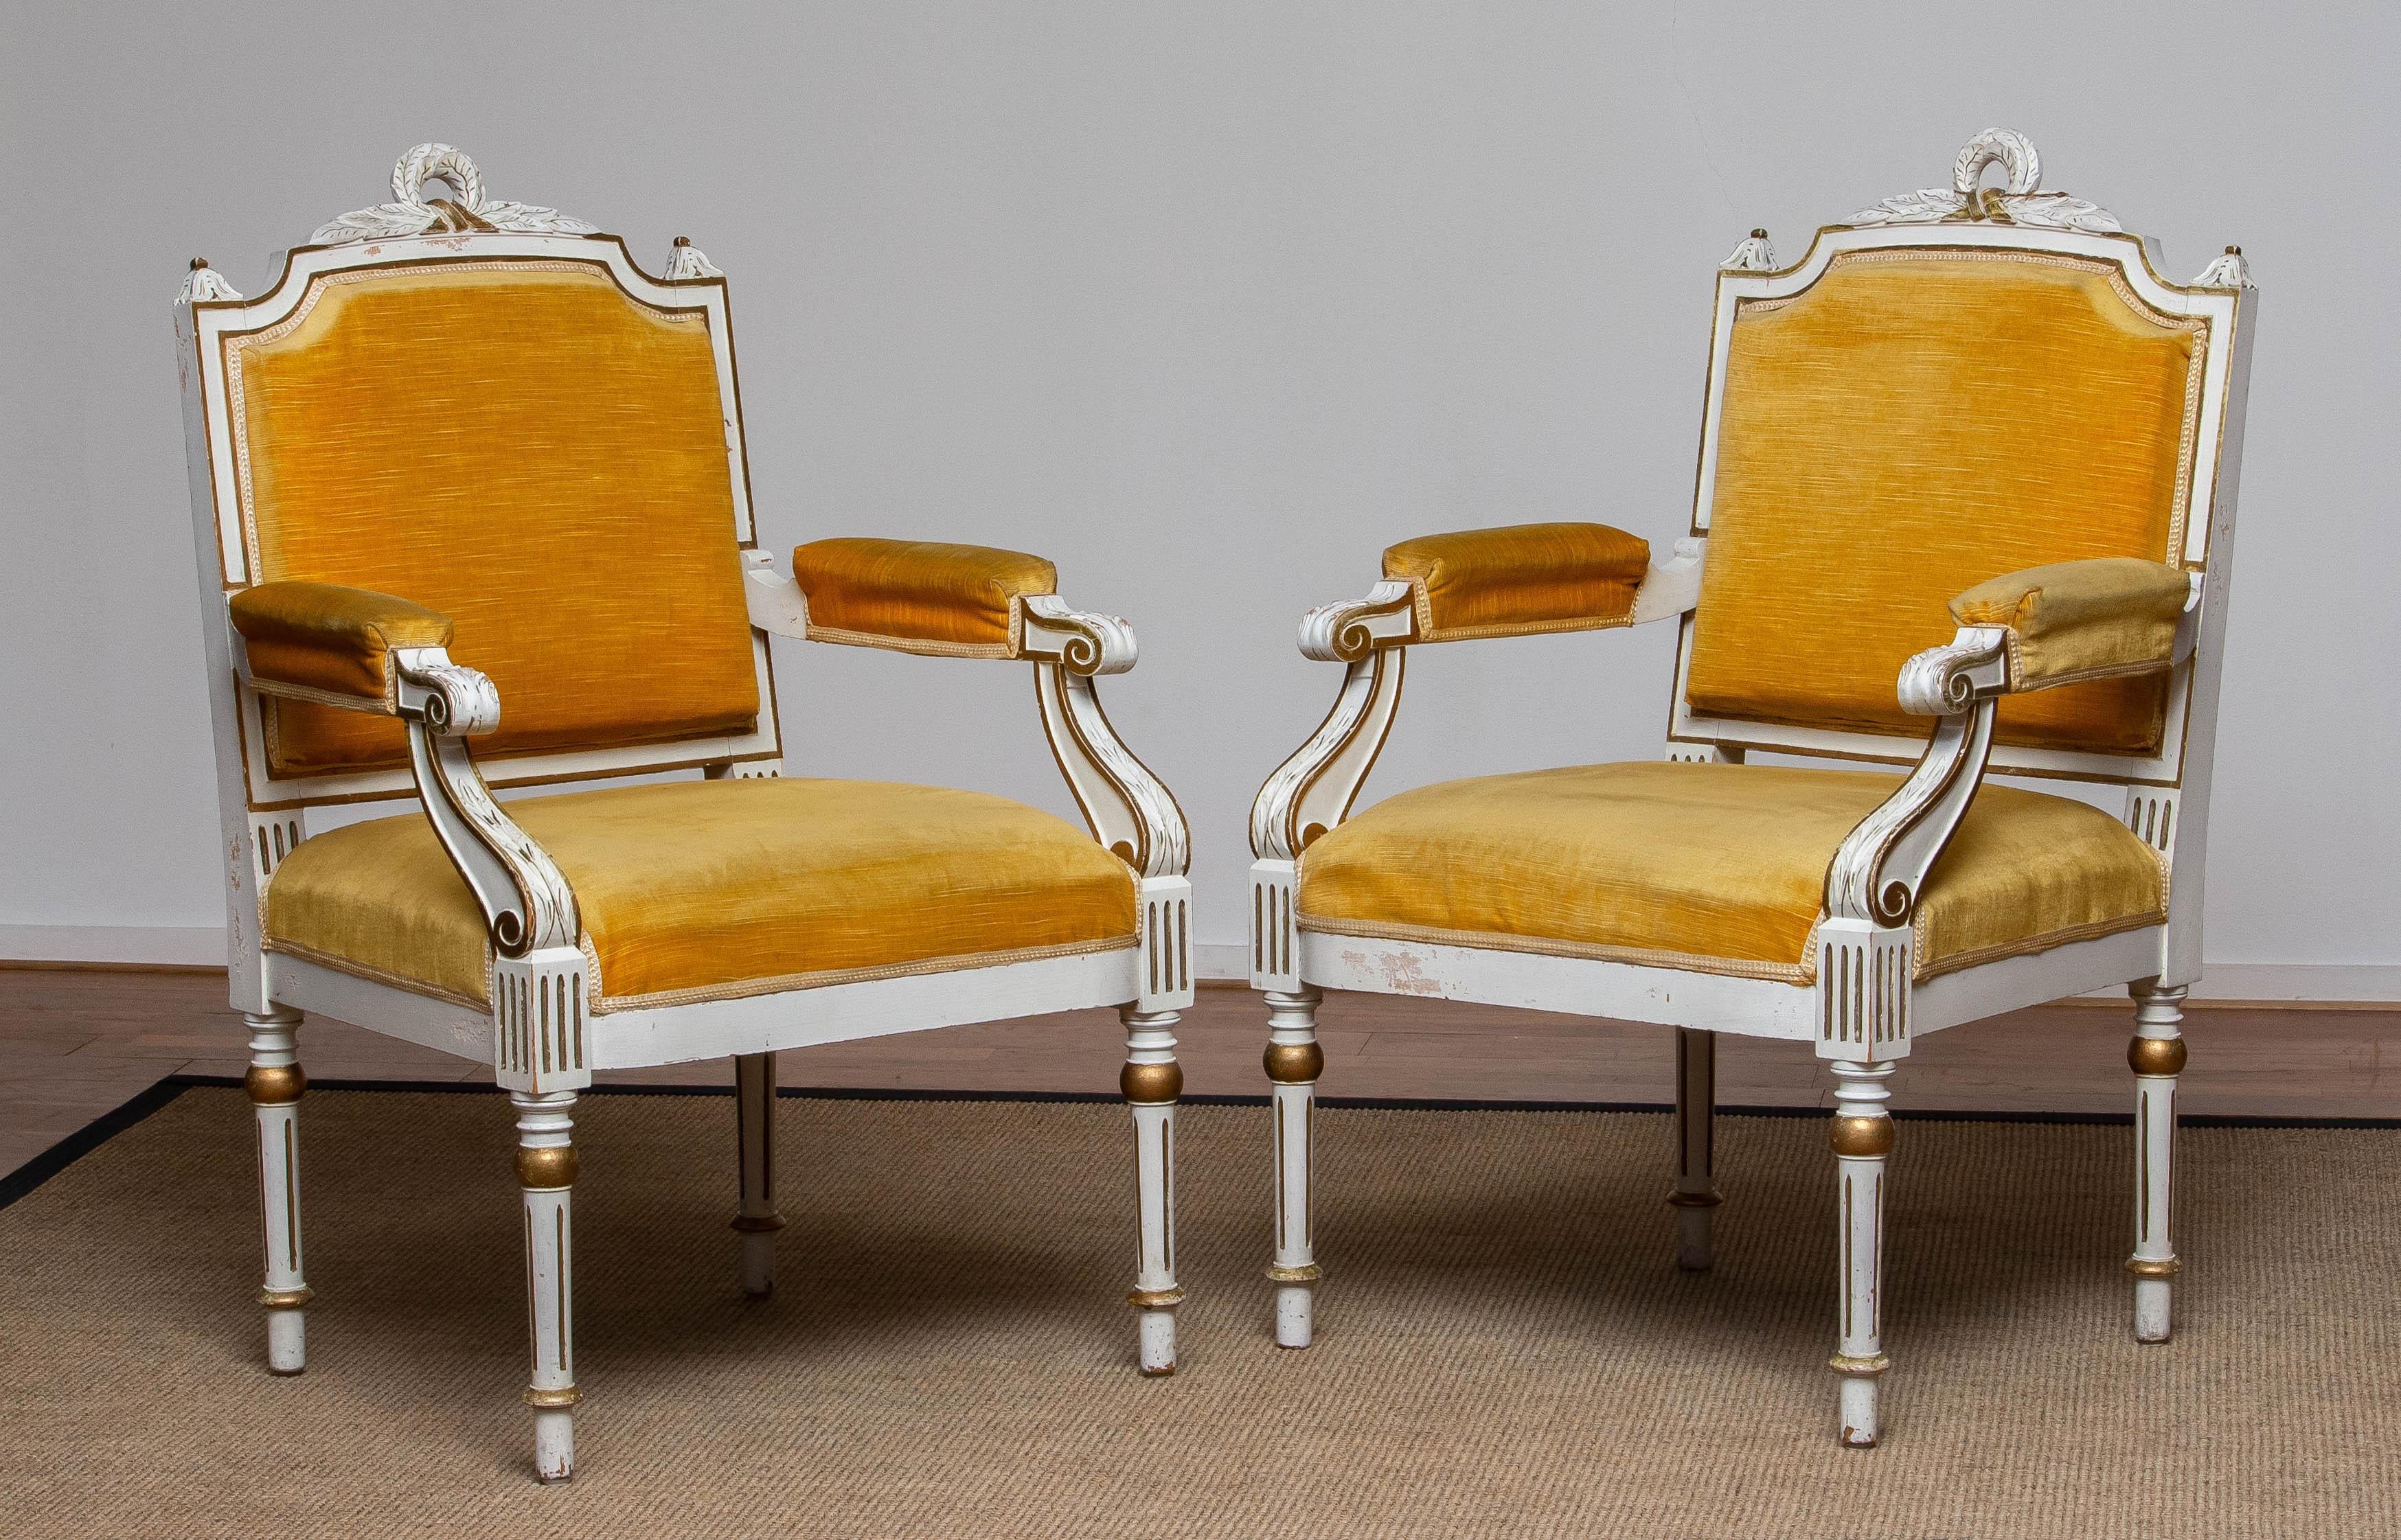 Very rich decorative set off two mid 19th century white Gustavian armchairs with gilded and painted details.
Both wooden frames are in good condition. The gold colored velvet upholstery is from a much later period and upholstered over the original